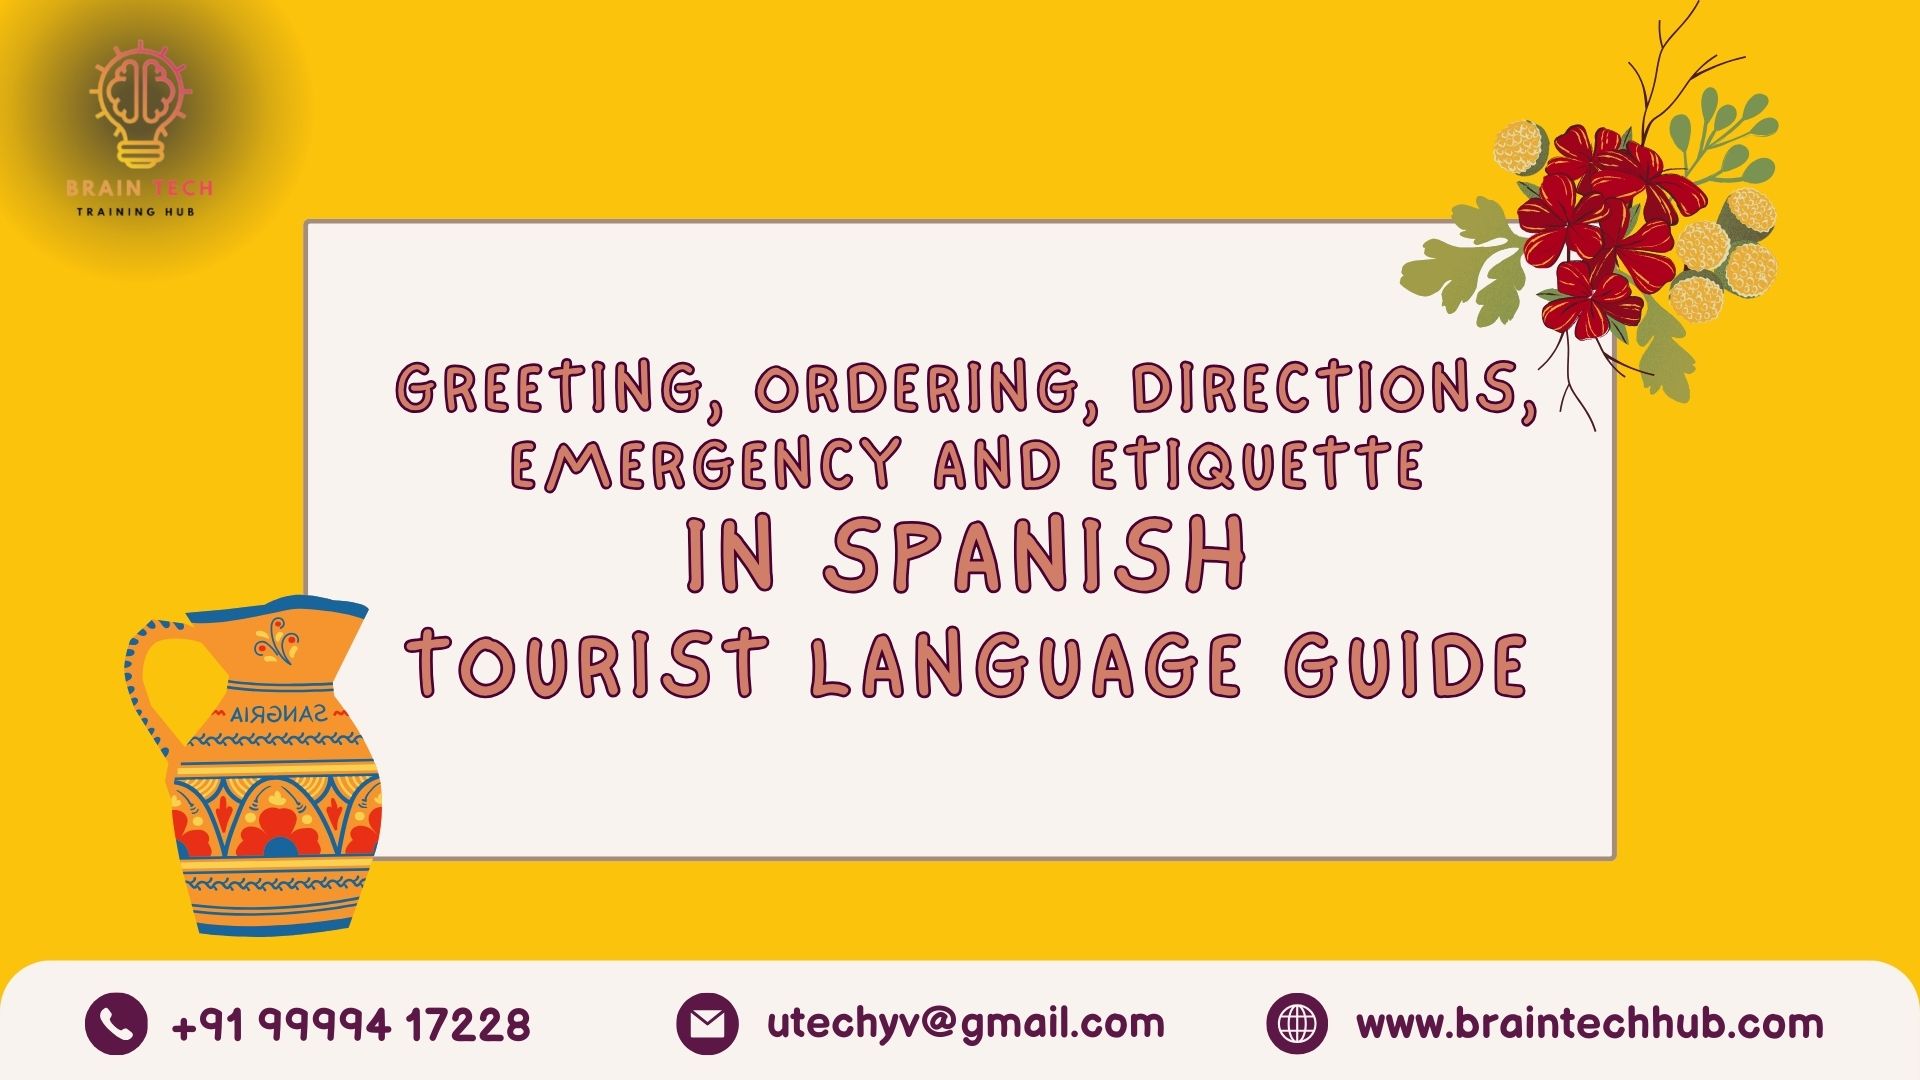 Greeting, Ordering, Directions, Emergency and Etiquette In Spanish Tourist Language Guide